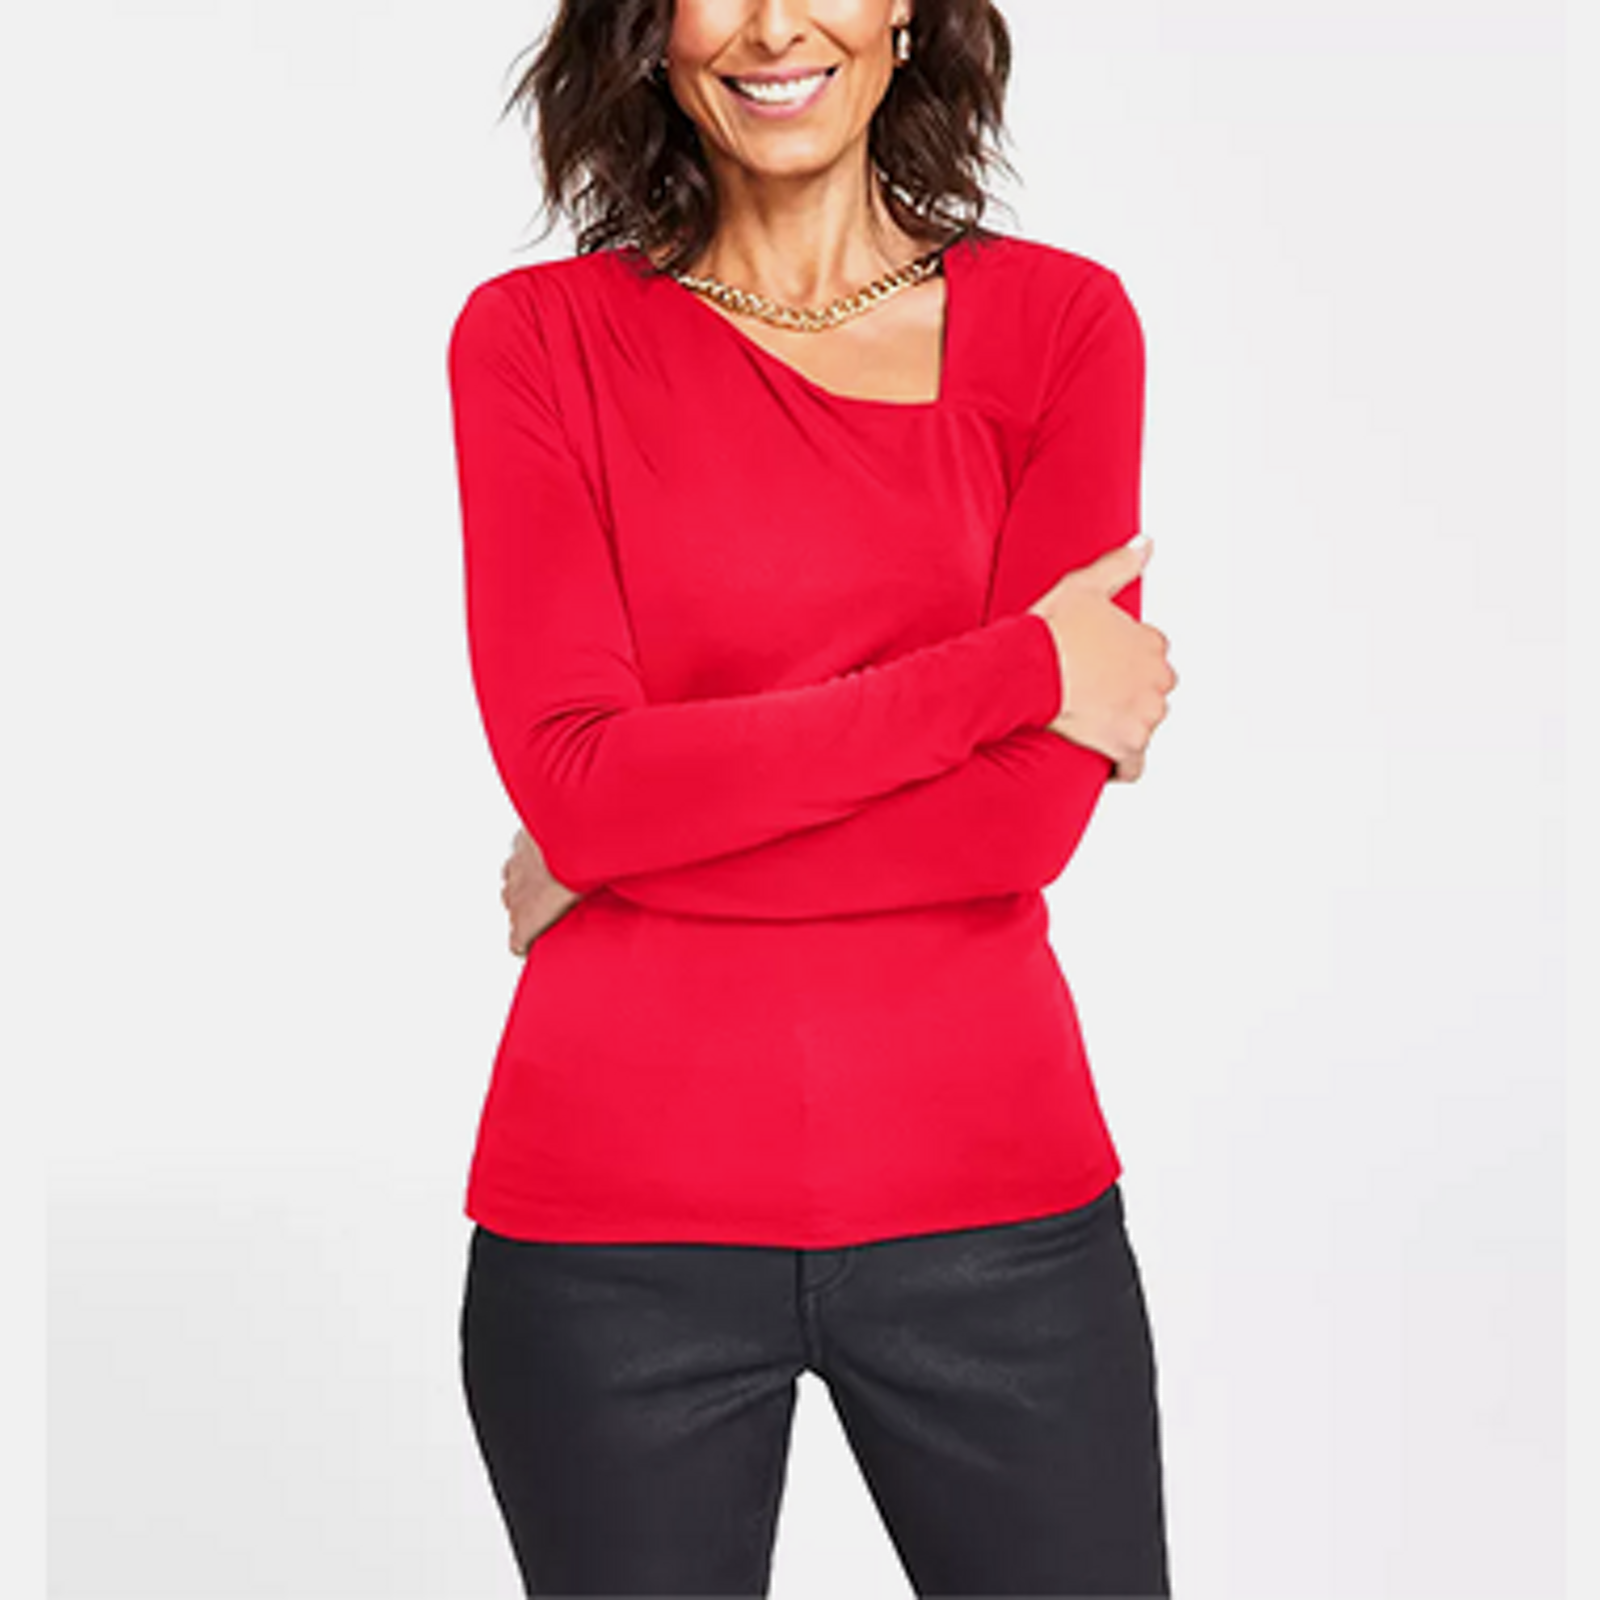 32 Degrees Active Women's Clothing Sale & Clearance - Macy's